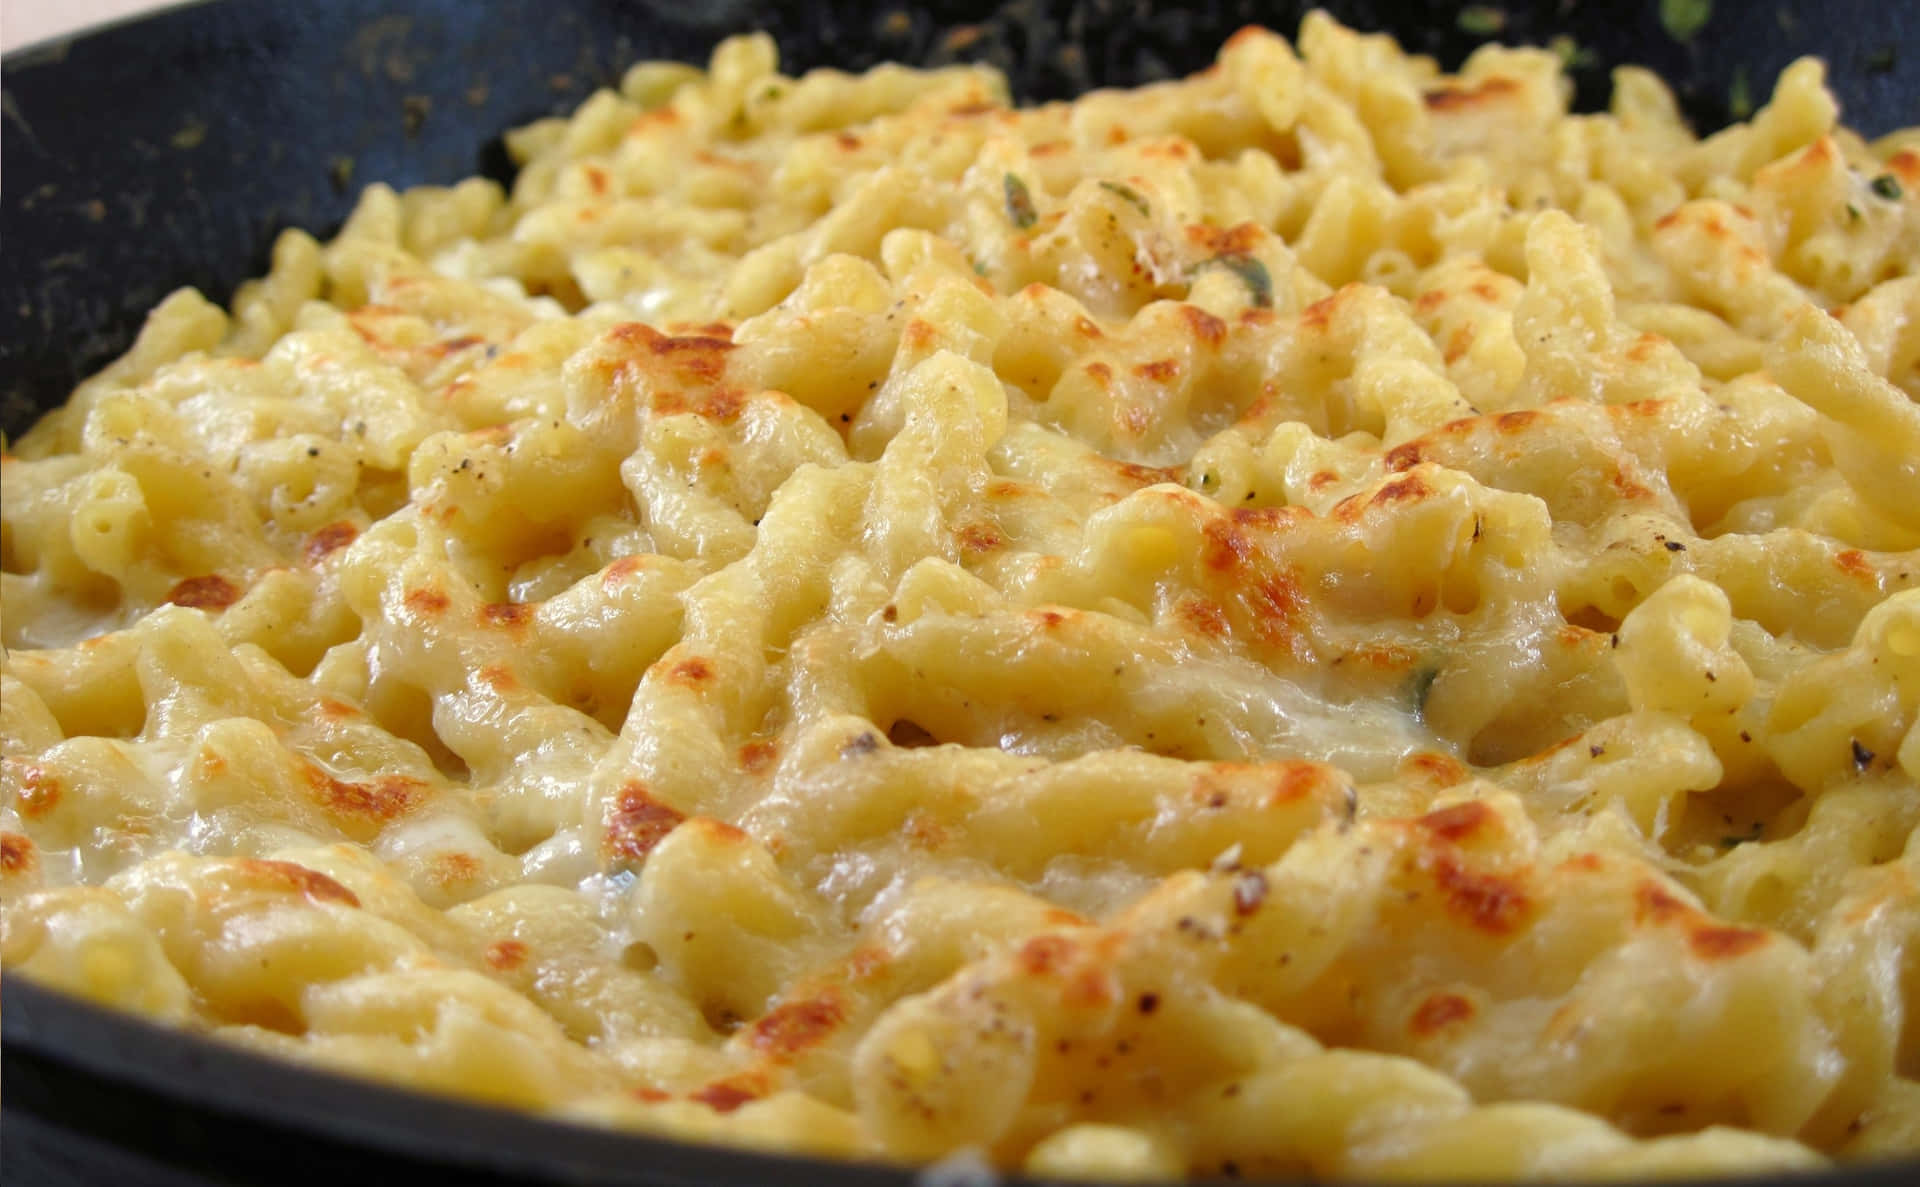 A Skillet With Macaroni And Cheese